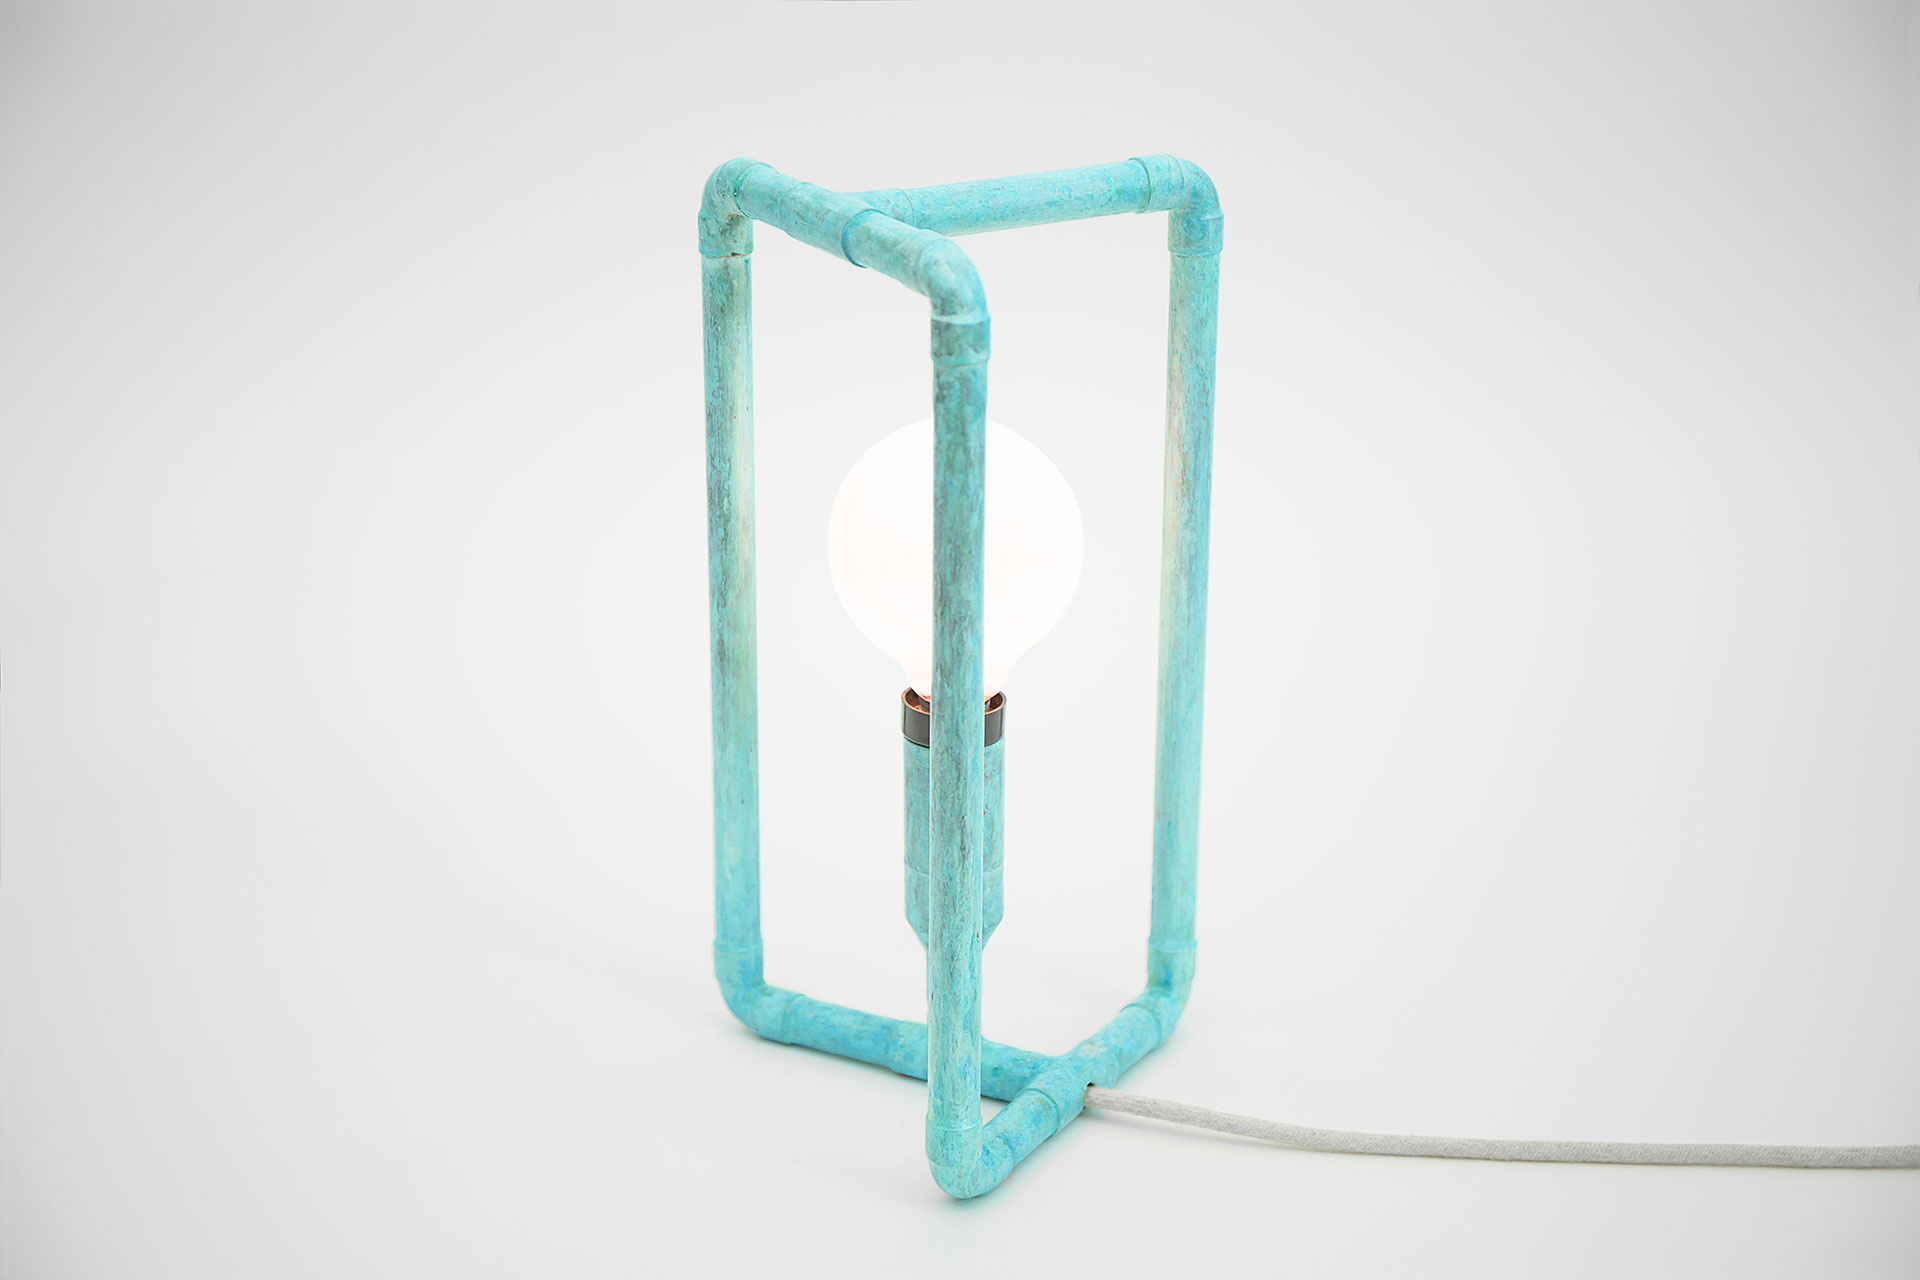 Cozy bedside lamp in trendy turquoise patina with creative touch dimmer inspired by scandinavian design